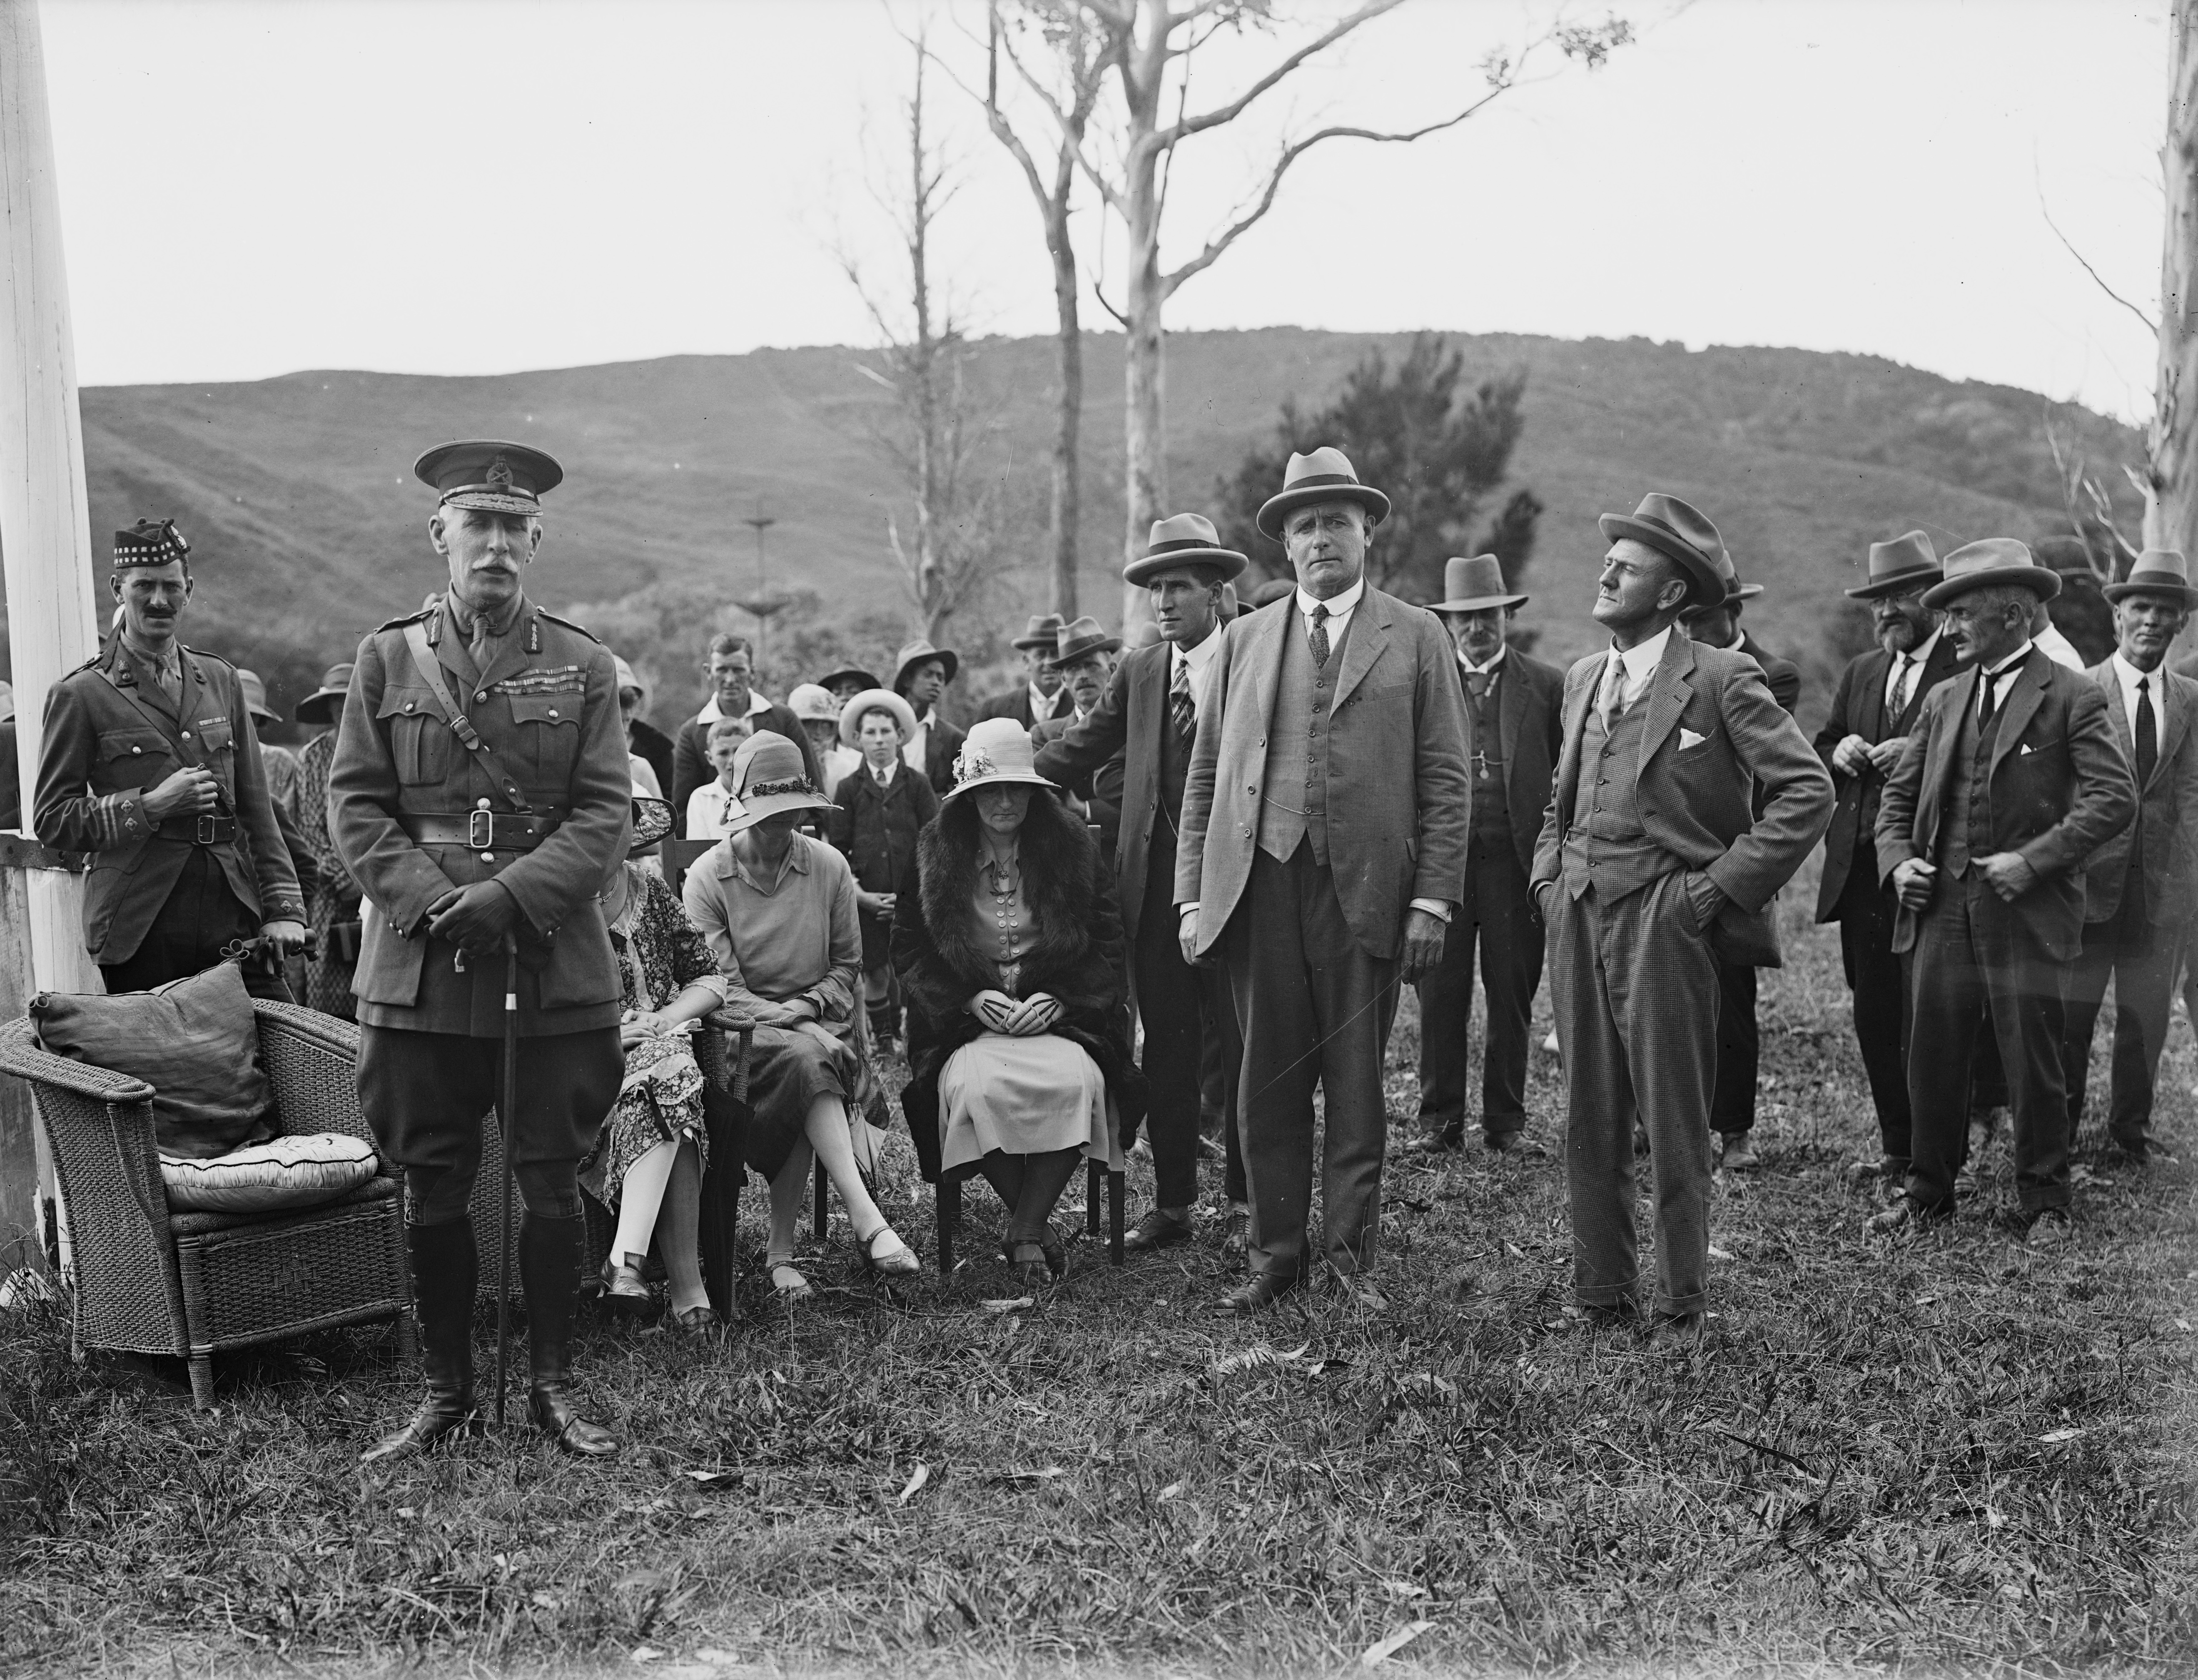 Sir_Charles_Fergusson_speaking_at_a_public_meeting,_Northland